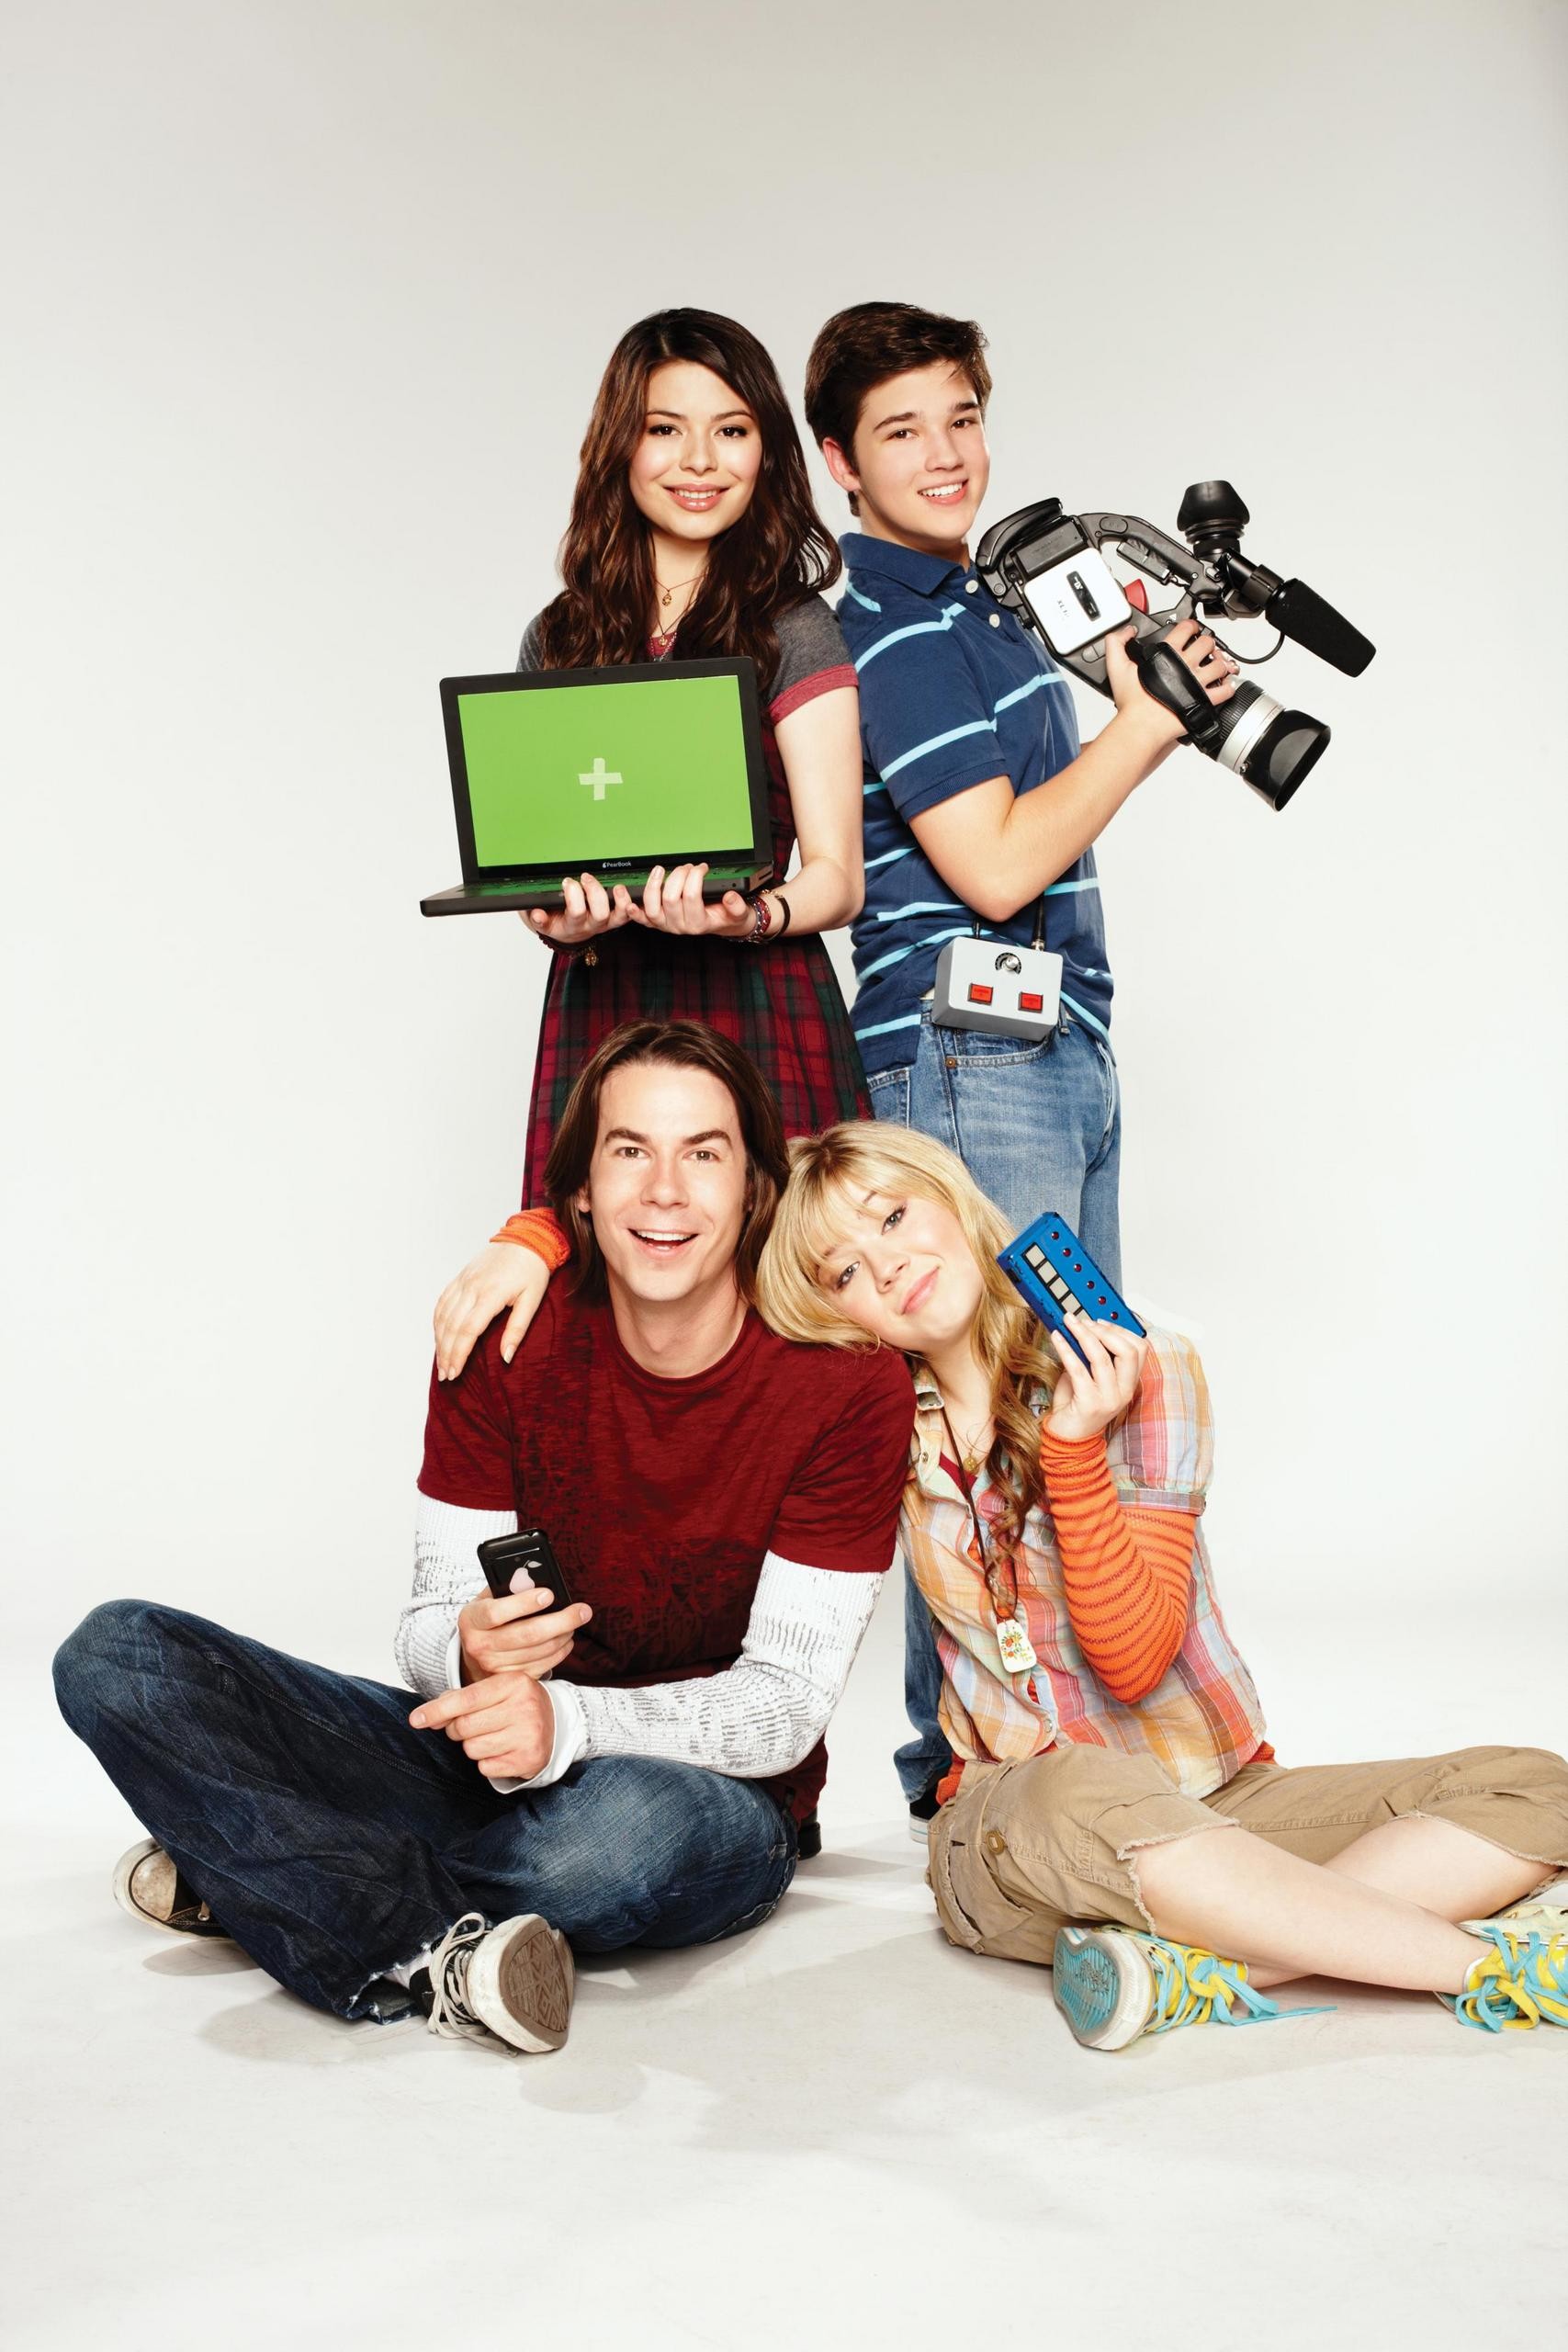 1707x2560 icarly photoshoot - Google Search